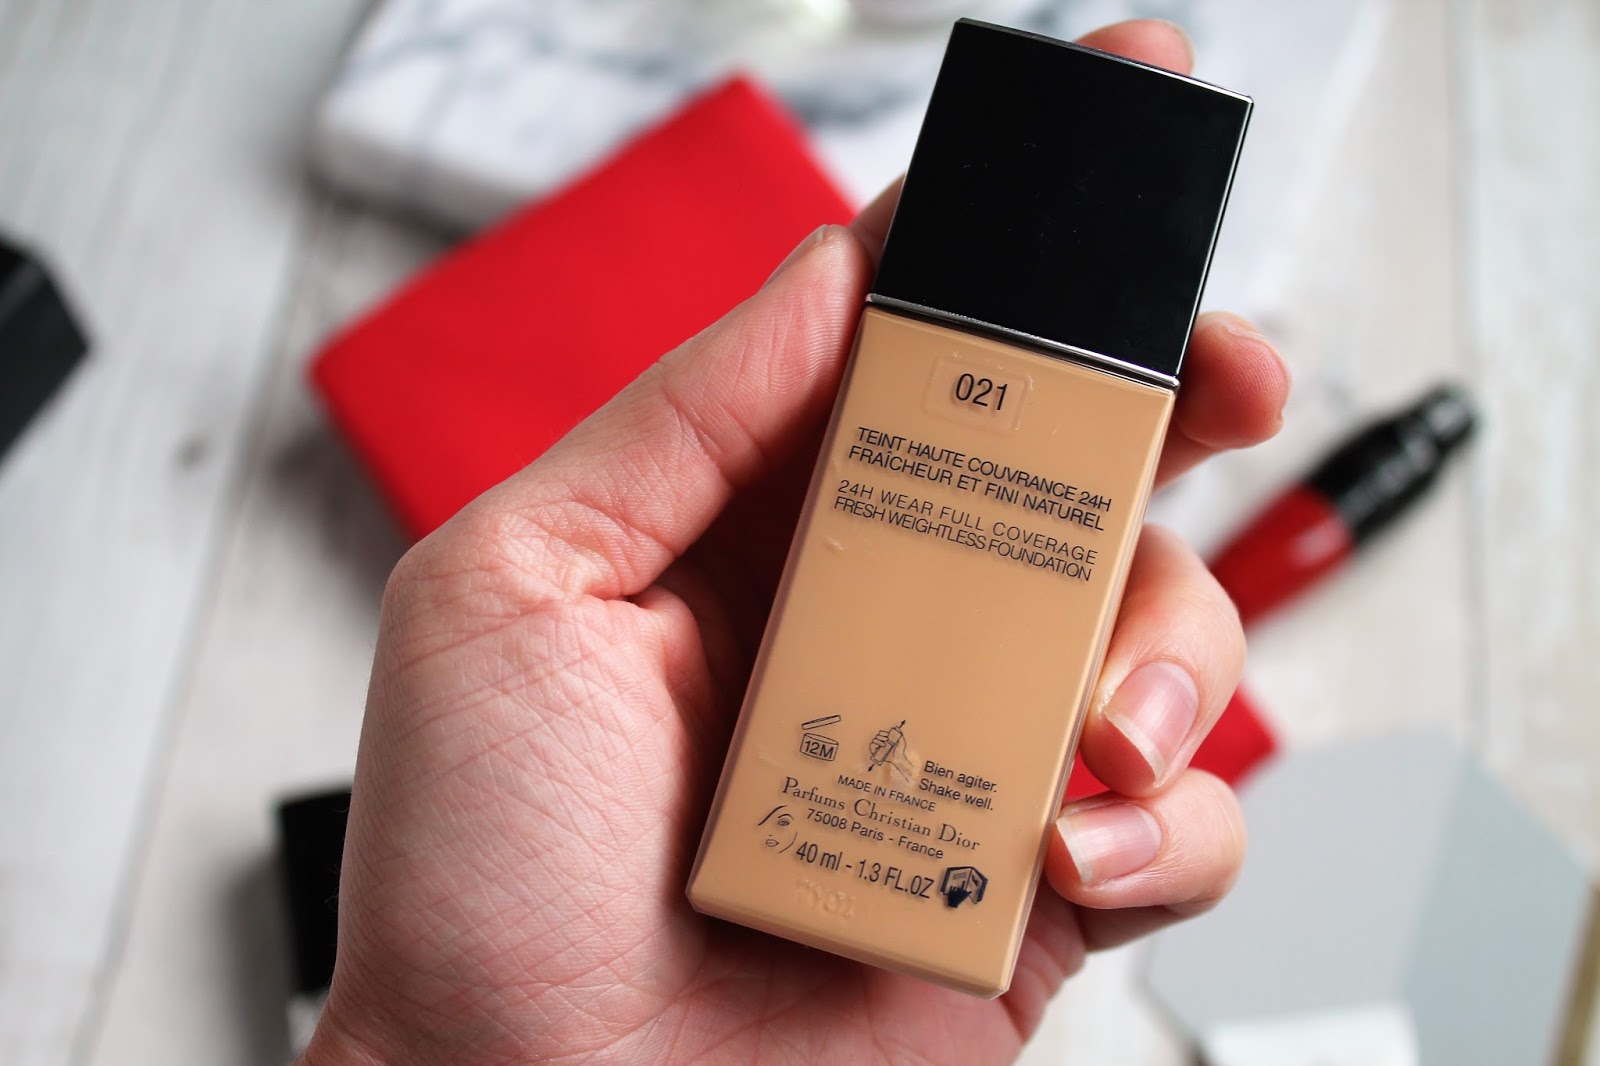 dior undercover foundation swatches